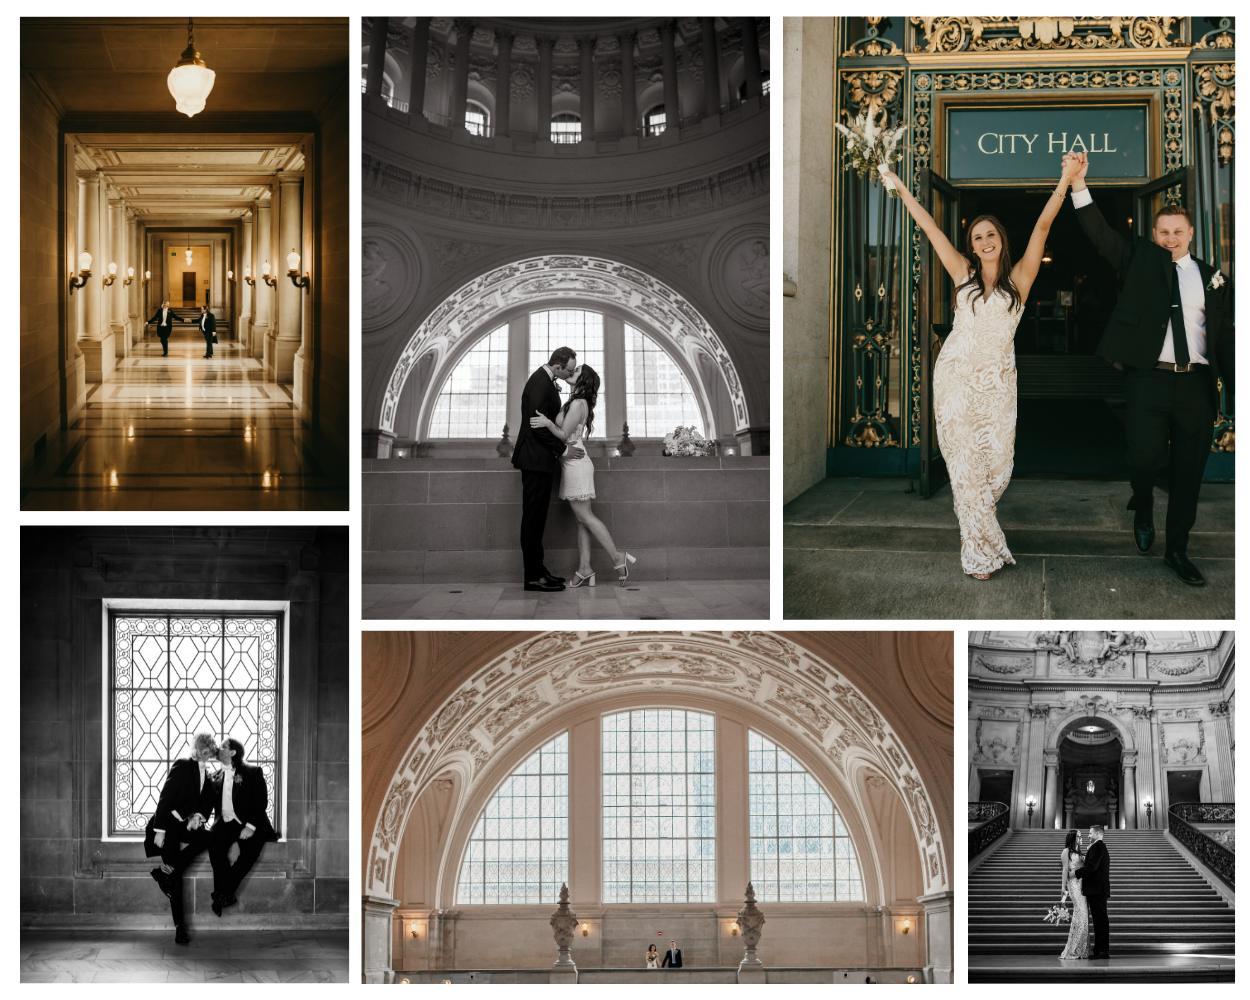 San Francisco City Hall wedding and elopement photographer.  Couples photography inside SF City Hall